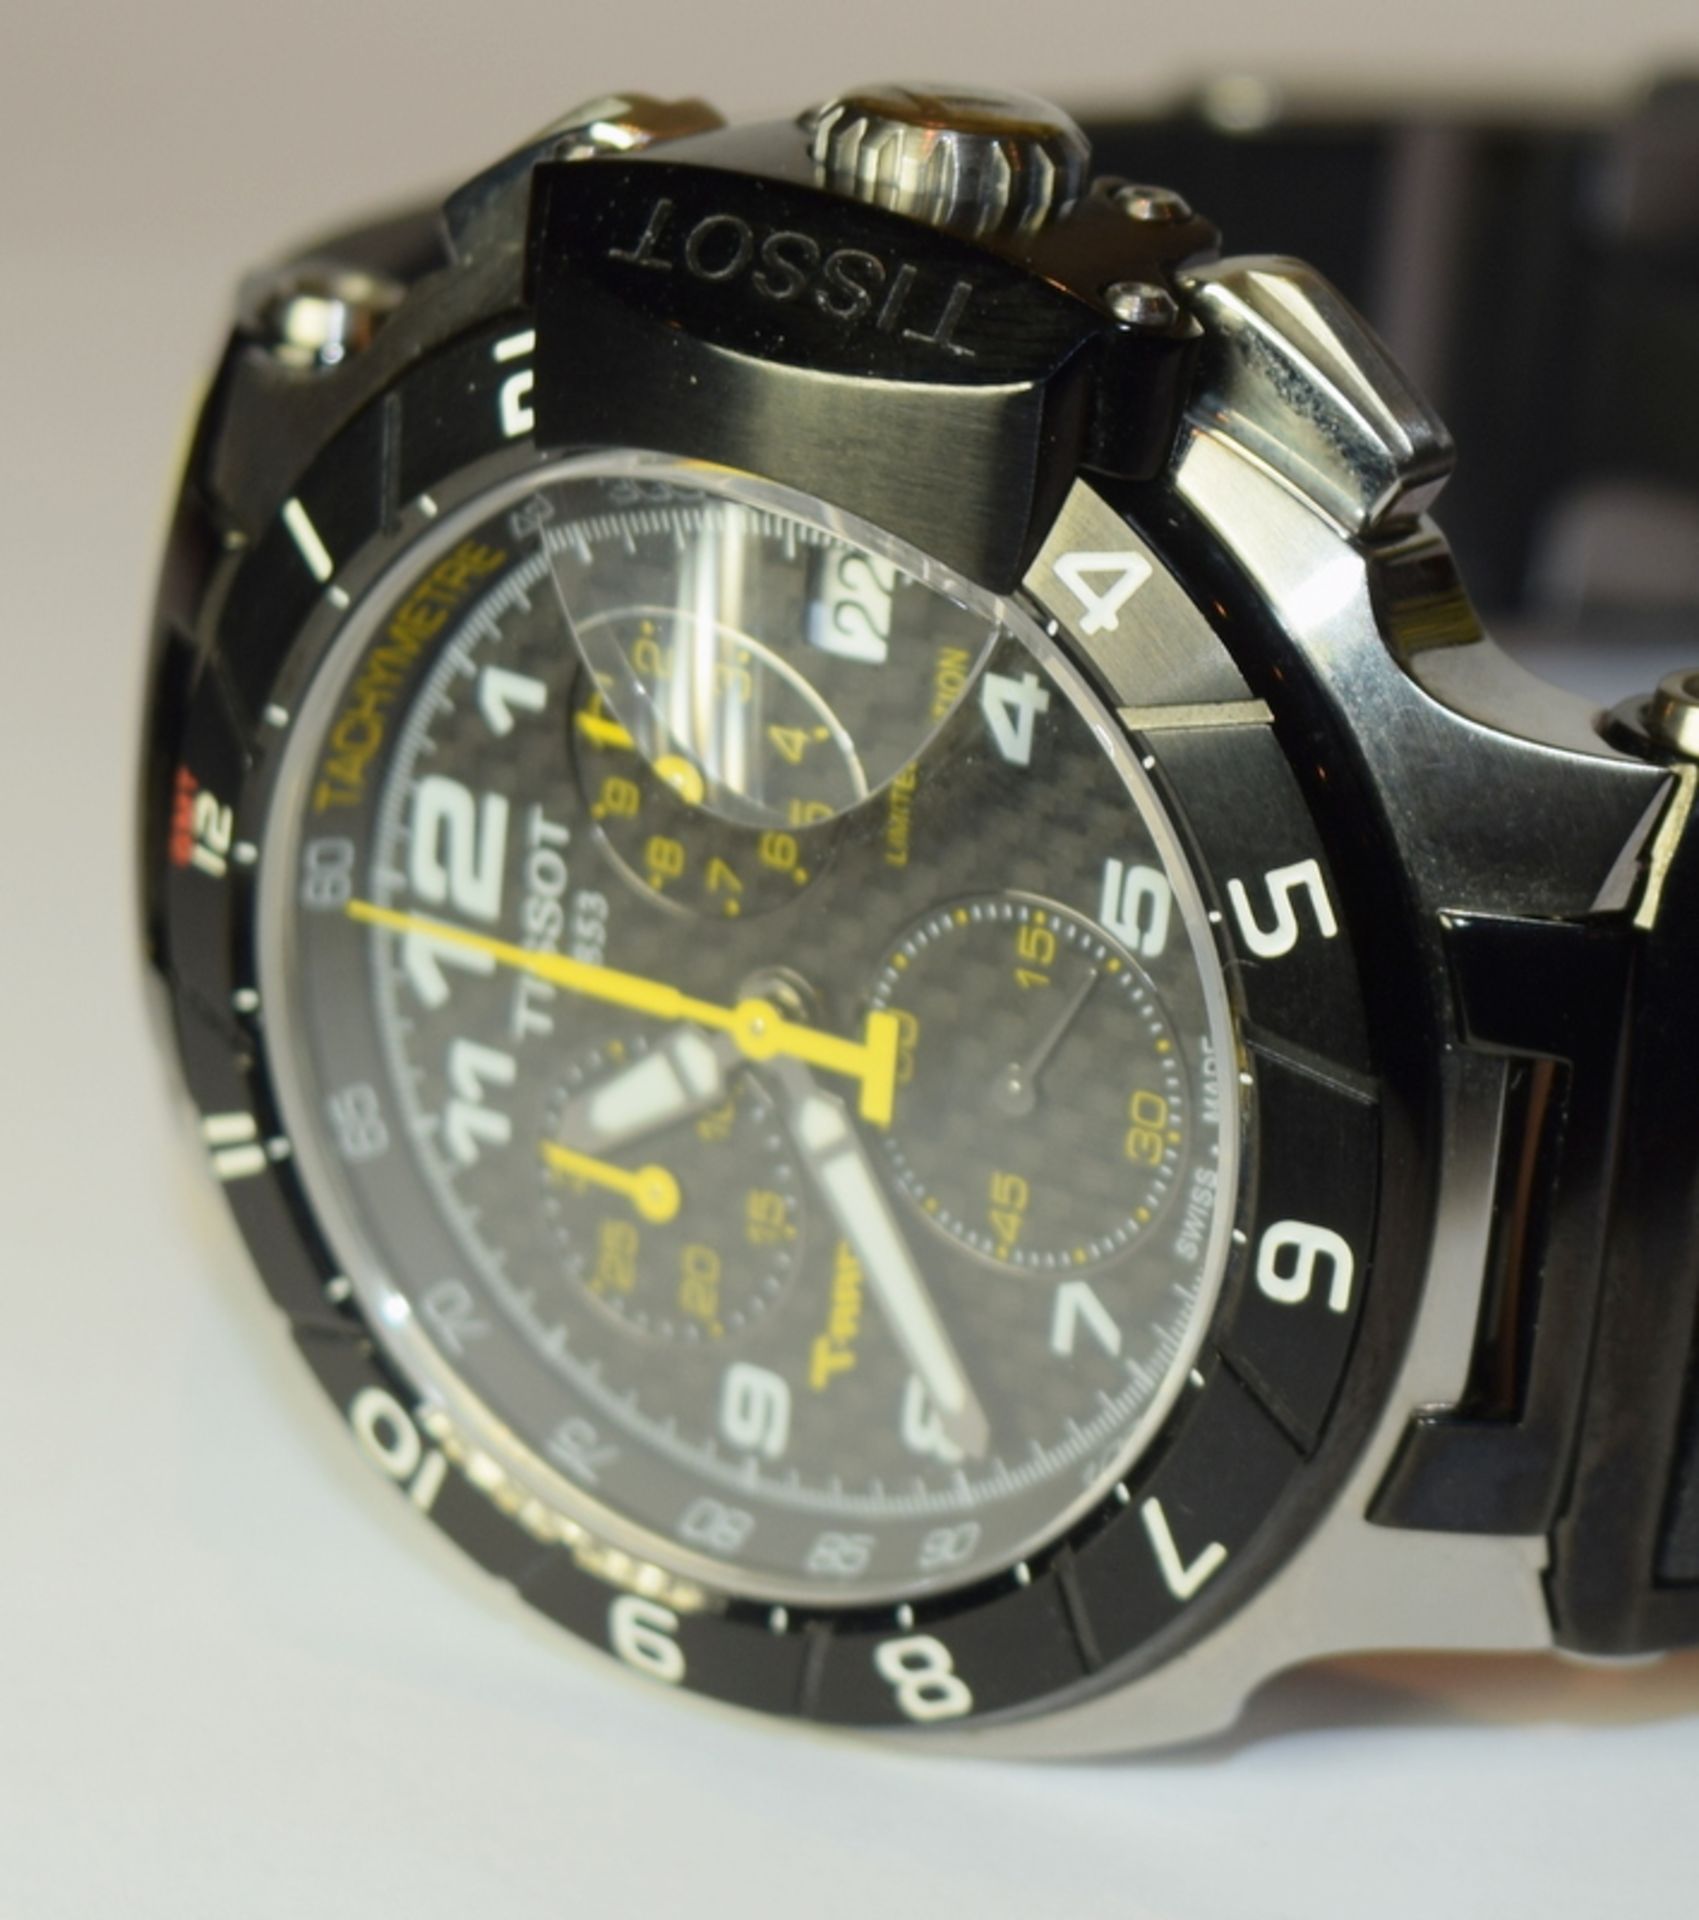 Tissot Limited Edition T-Race MOTO GP Watch - Image 4 of 7